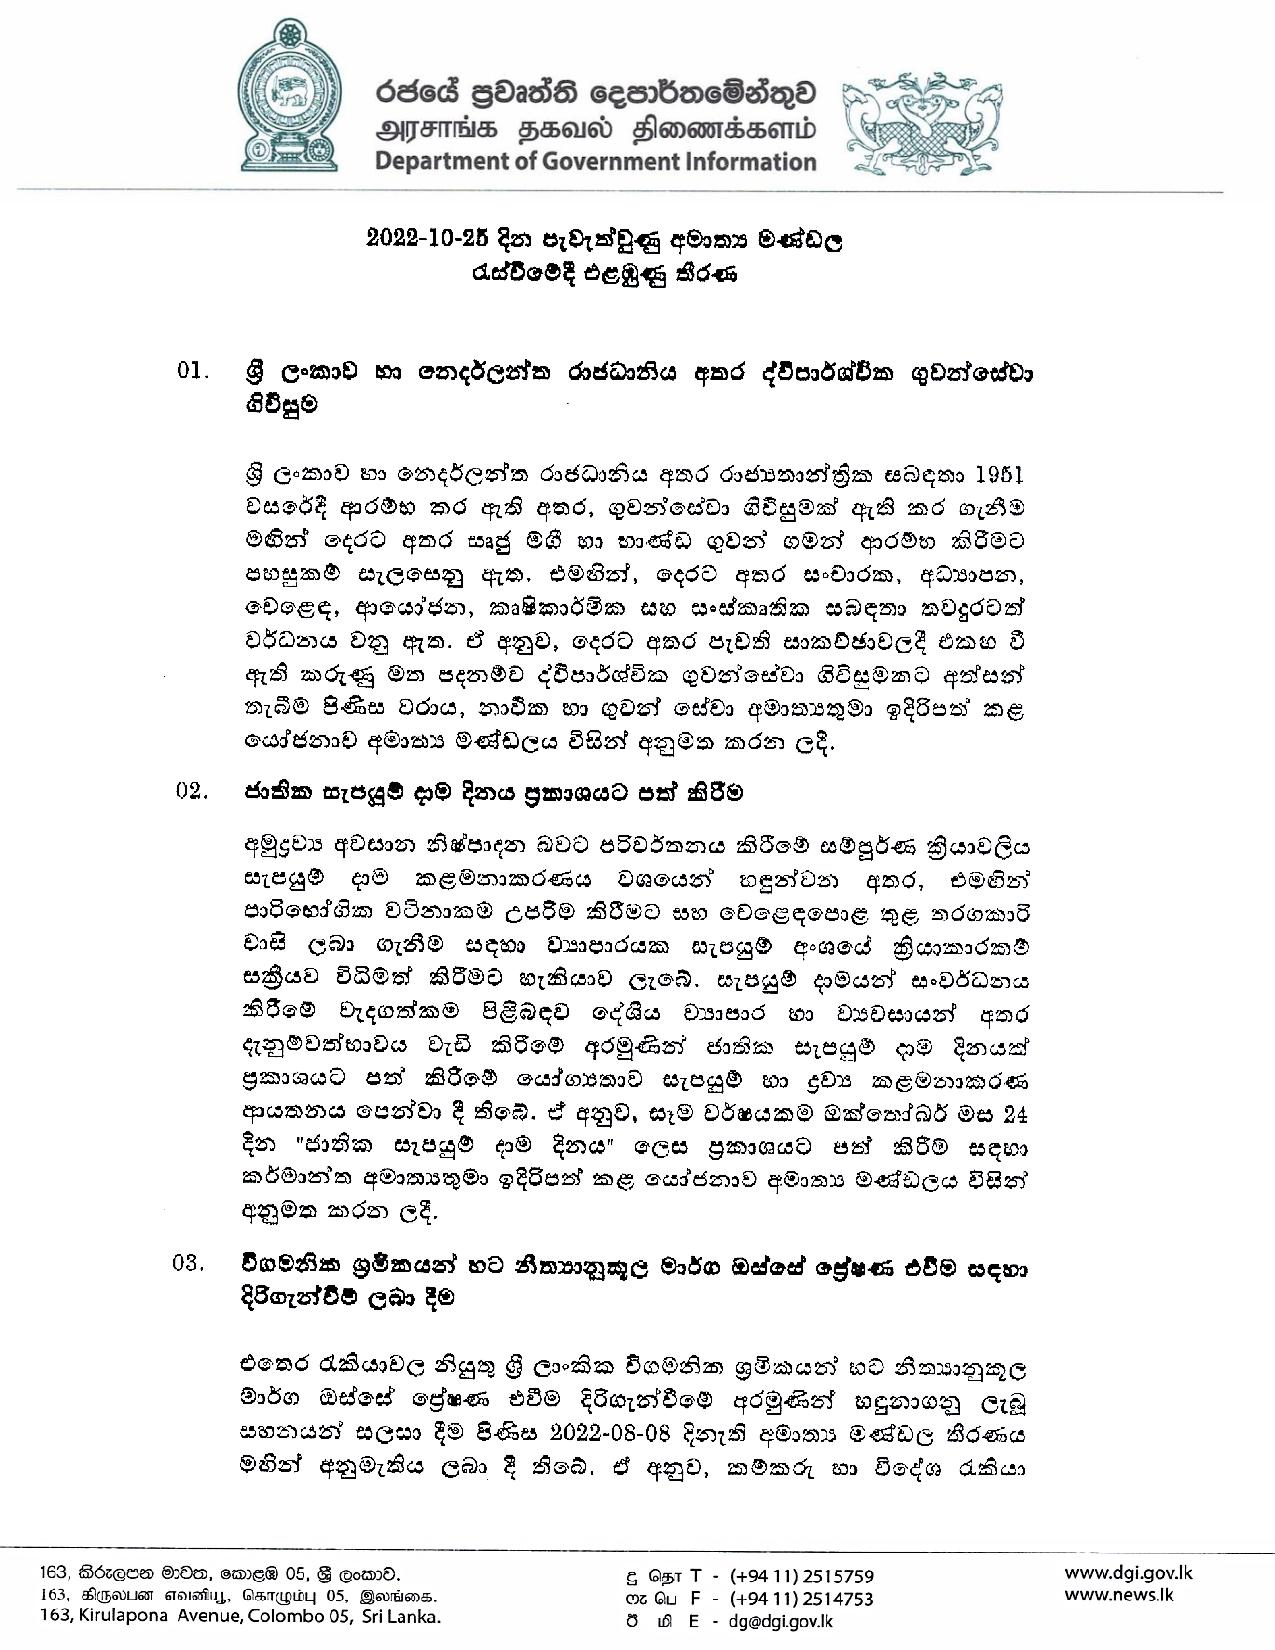 Cabinet Decision on 25.10.2022 page 001